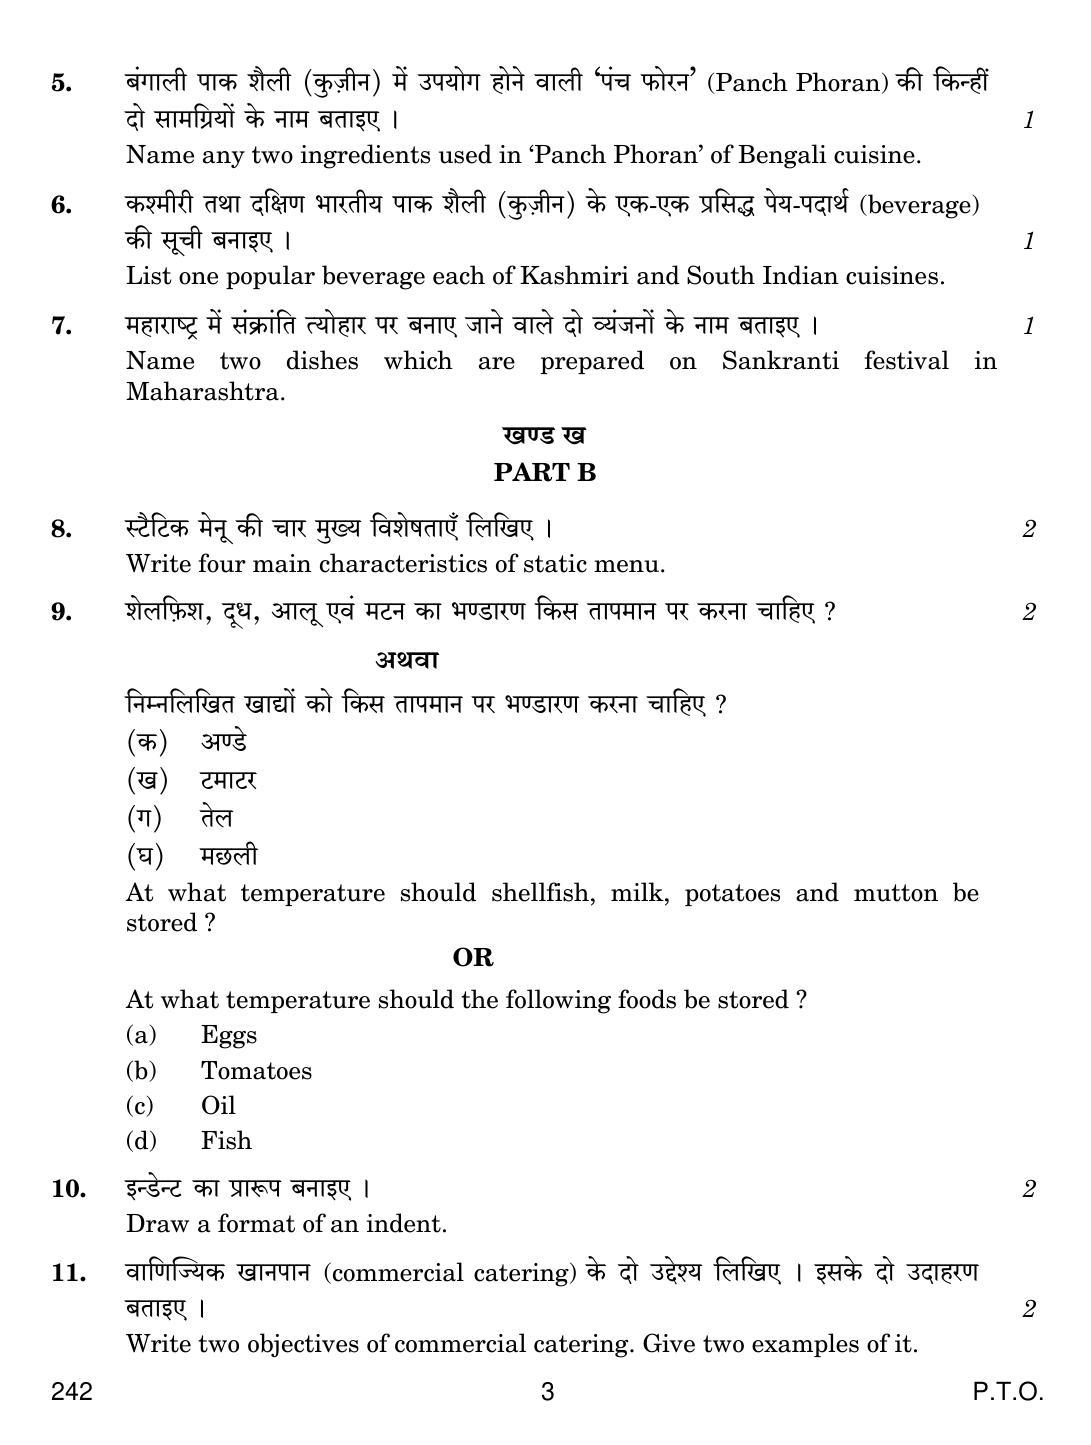 CBSE Class 12 242 FOOD PRODUCTION IV 2018 Question Paper - Page 3